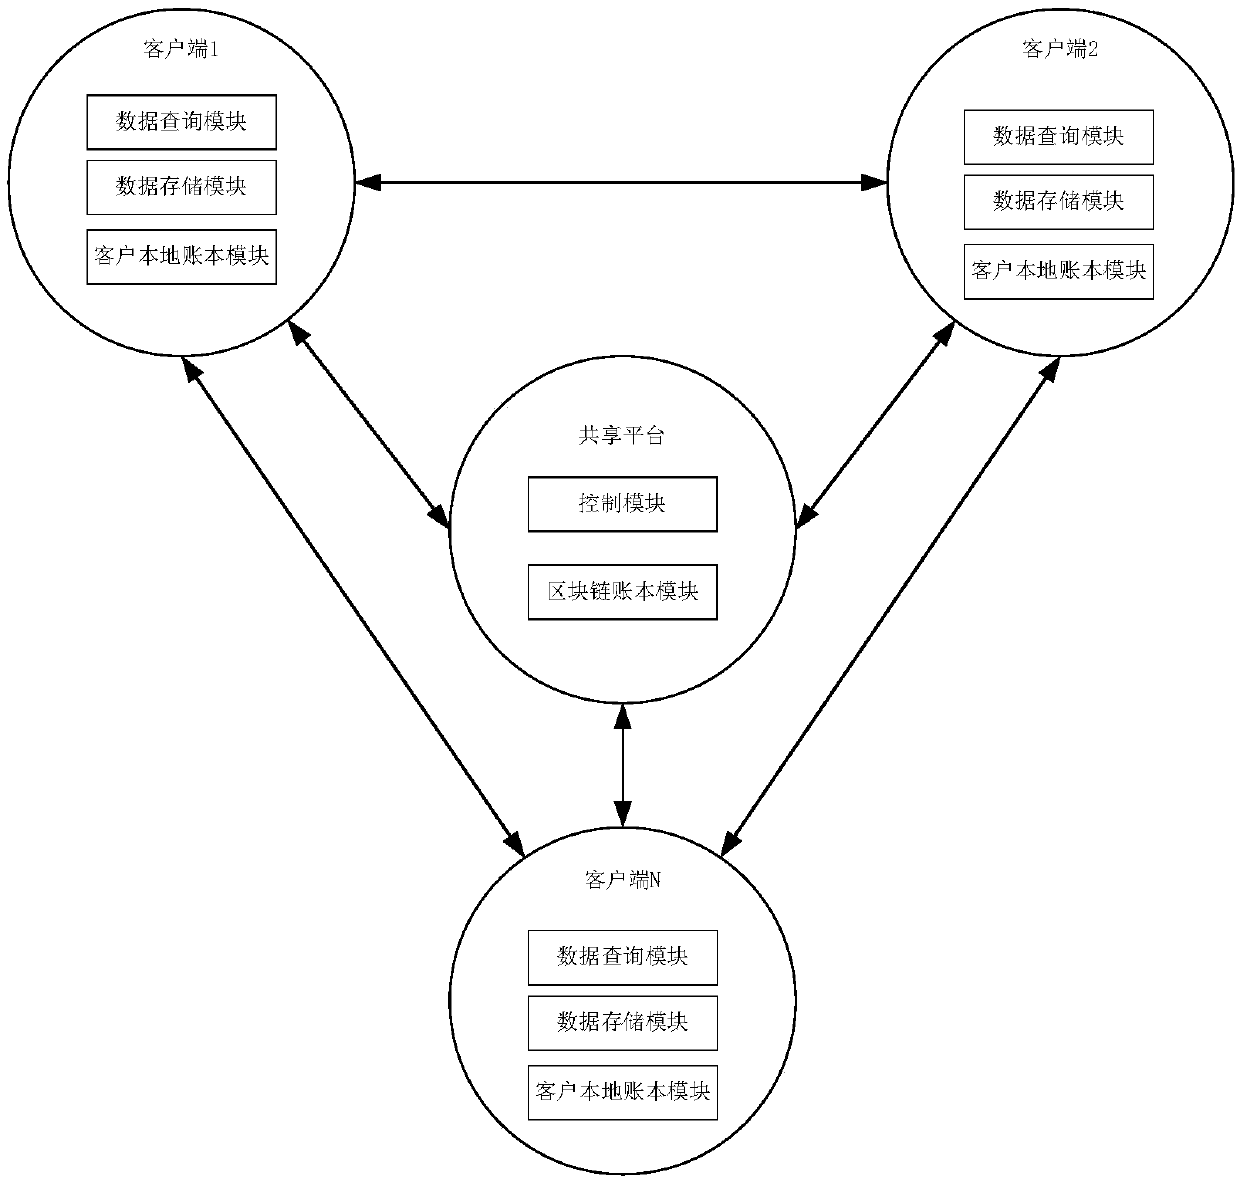 Financial institution user data sharing method and system based on a block chain technology